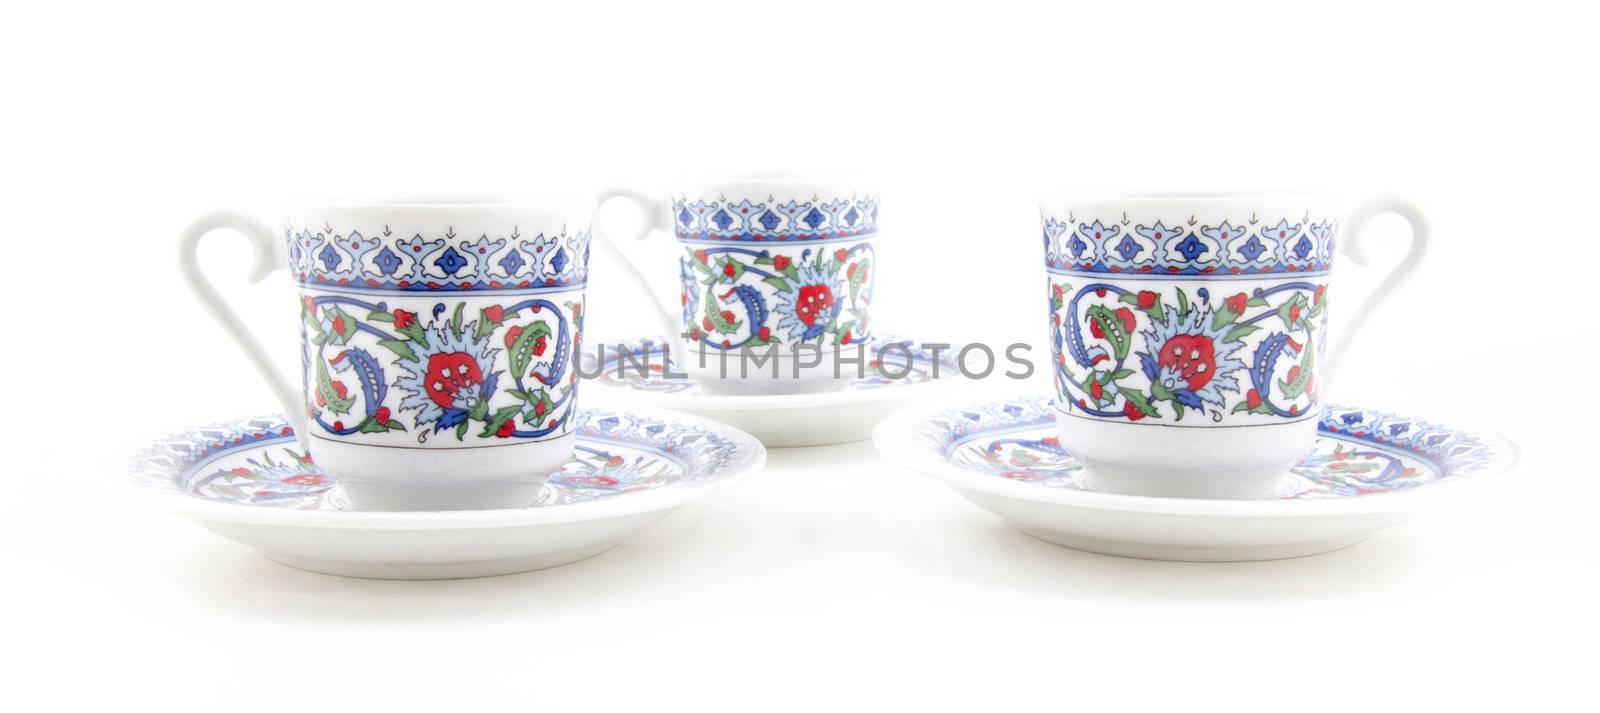 Ornamented teacups isolated on white background for site